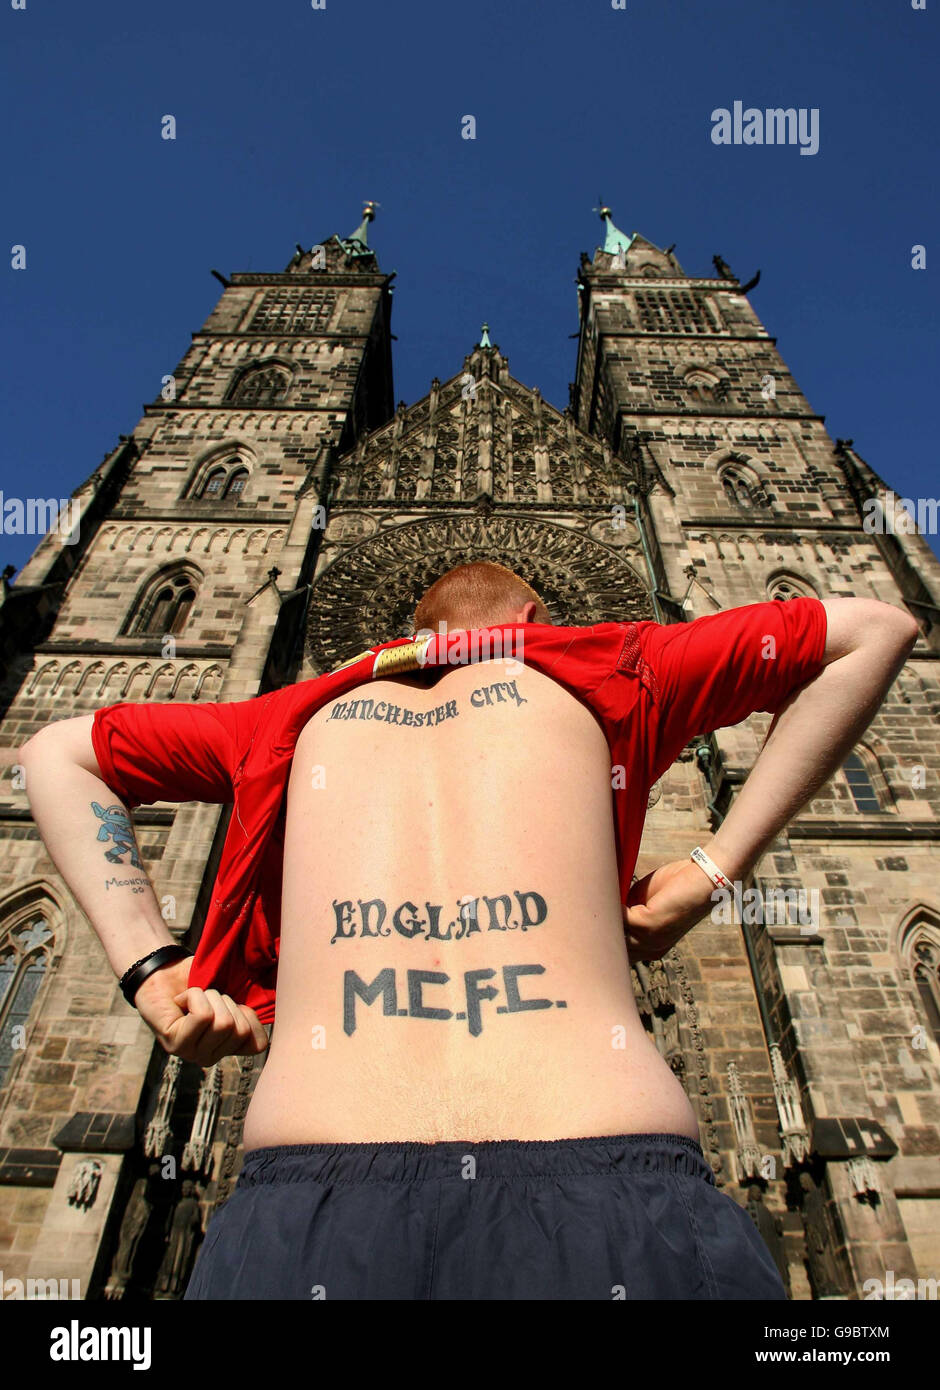 Tattoos are visible signs of lived faith - U.S. Catholic